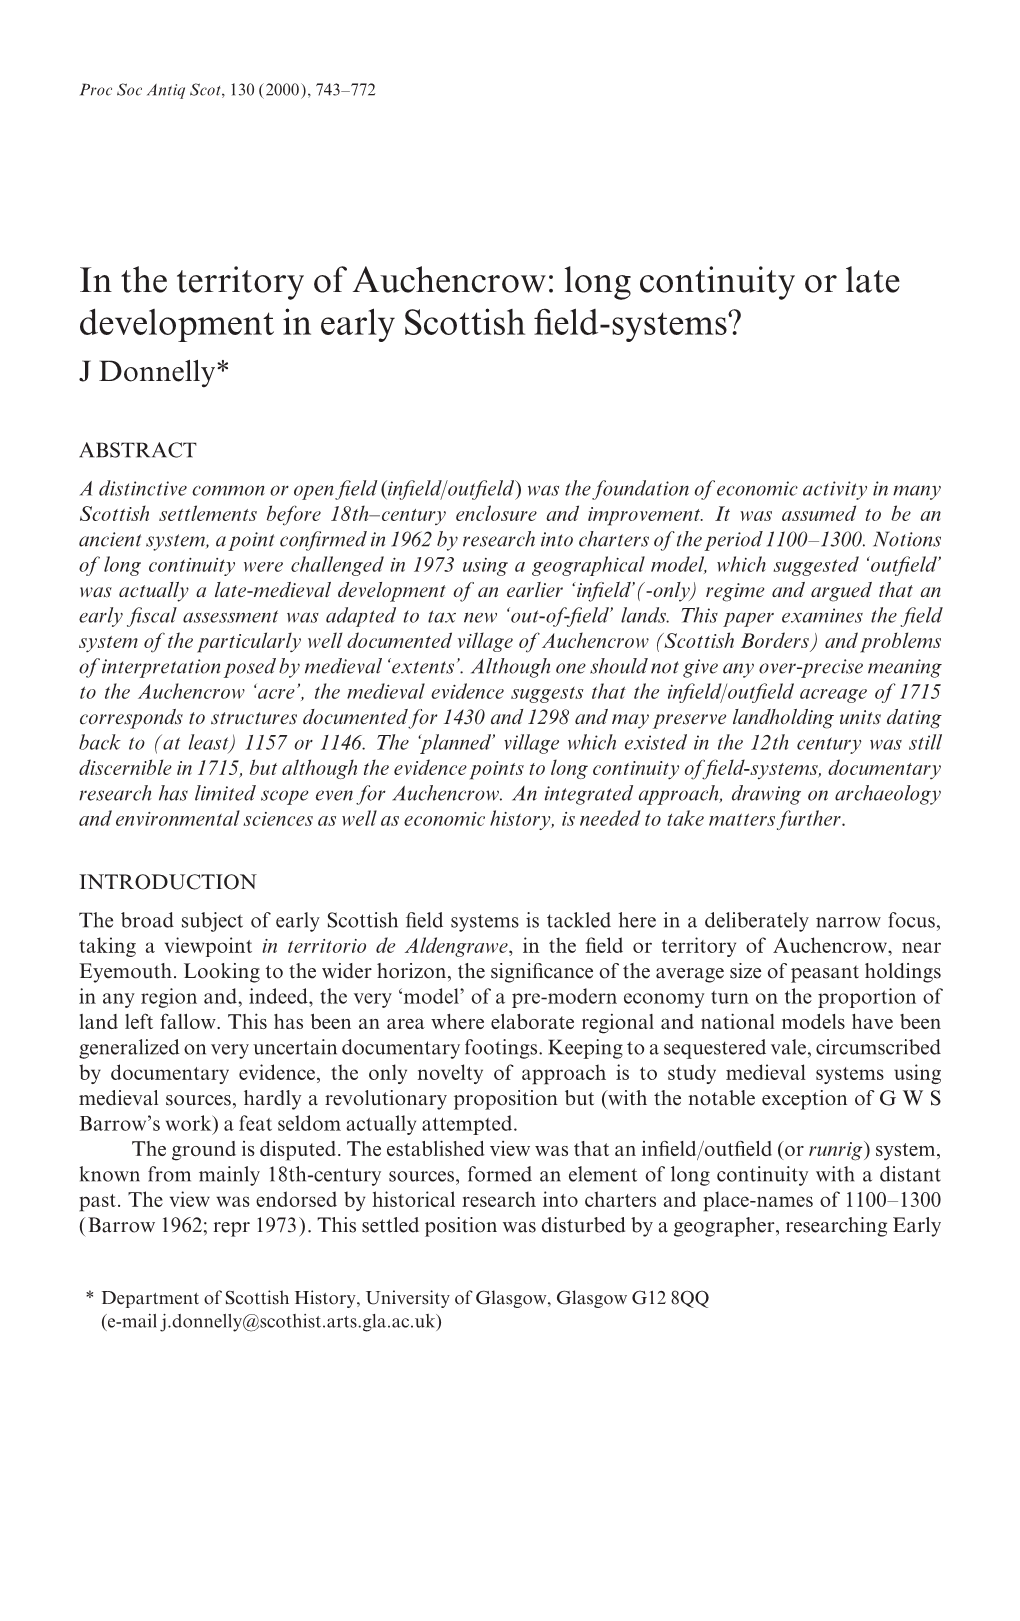 In the Territory of Auchencrow: Long Continuity Or Late Development in Early Scottish ﬁeld-Systems? J Donnelly*